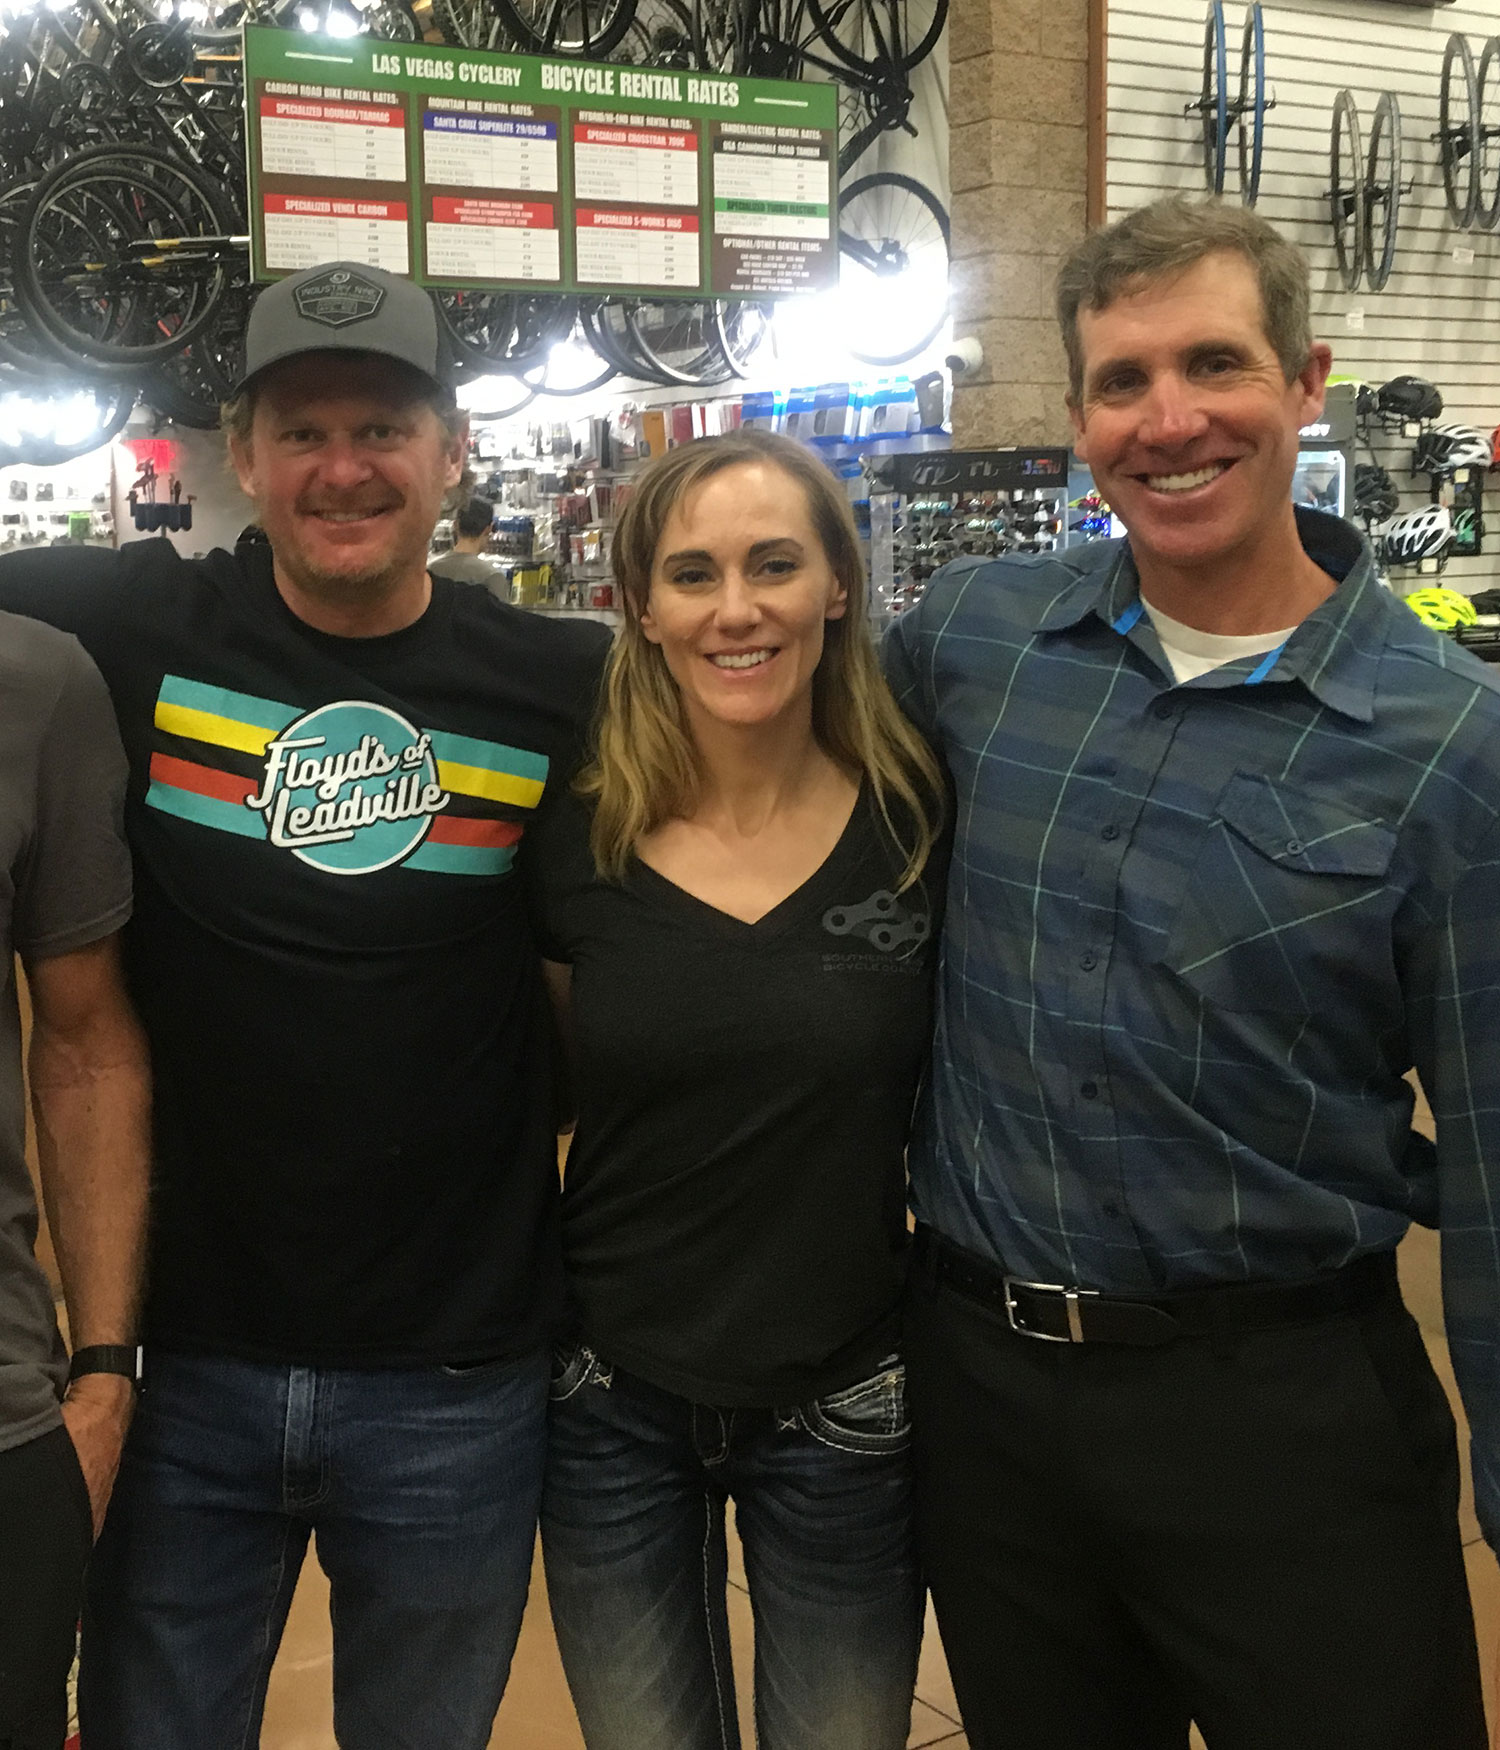 Fisher and Landis at Las Vegas Cyclery